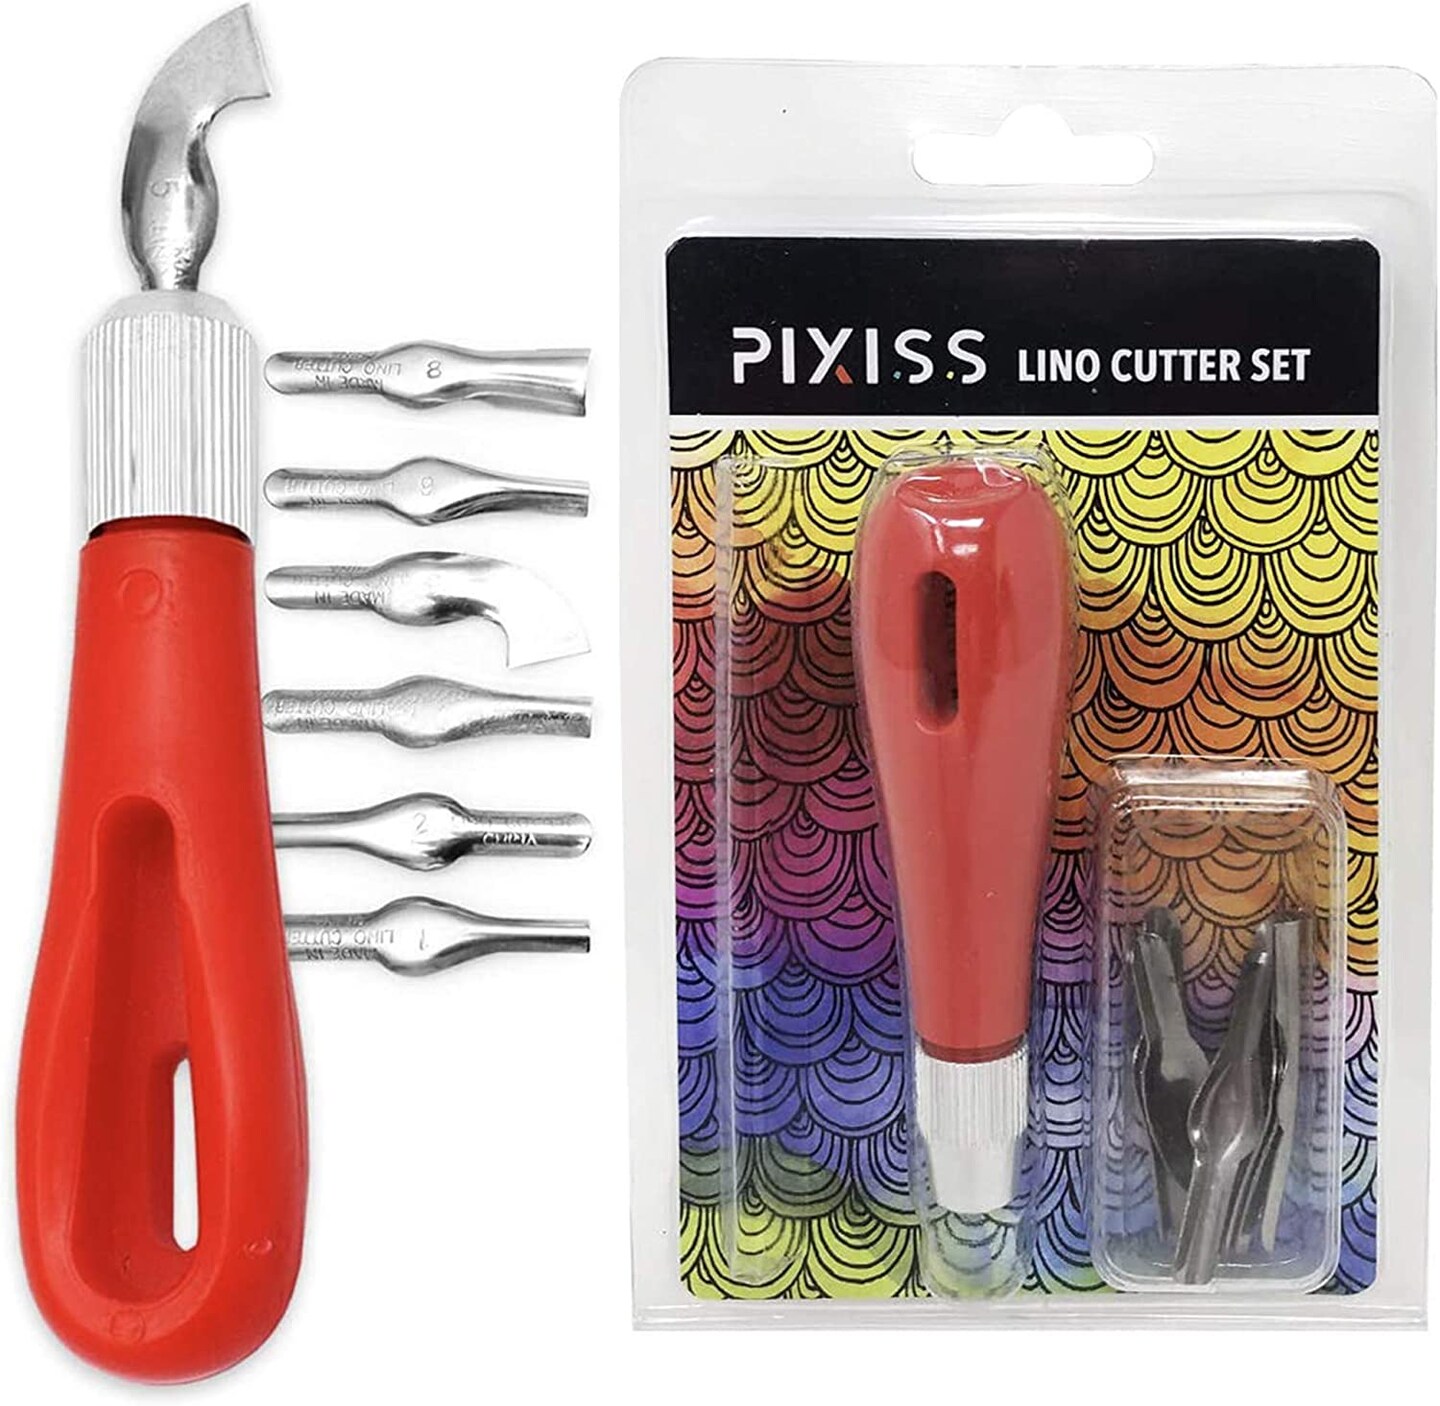 Pixiss Rubber Block Stamp Carving Kit with Cutter Tools, 25-Pack Carving Rubber Stamps